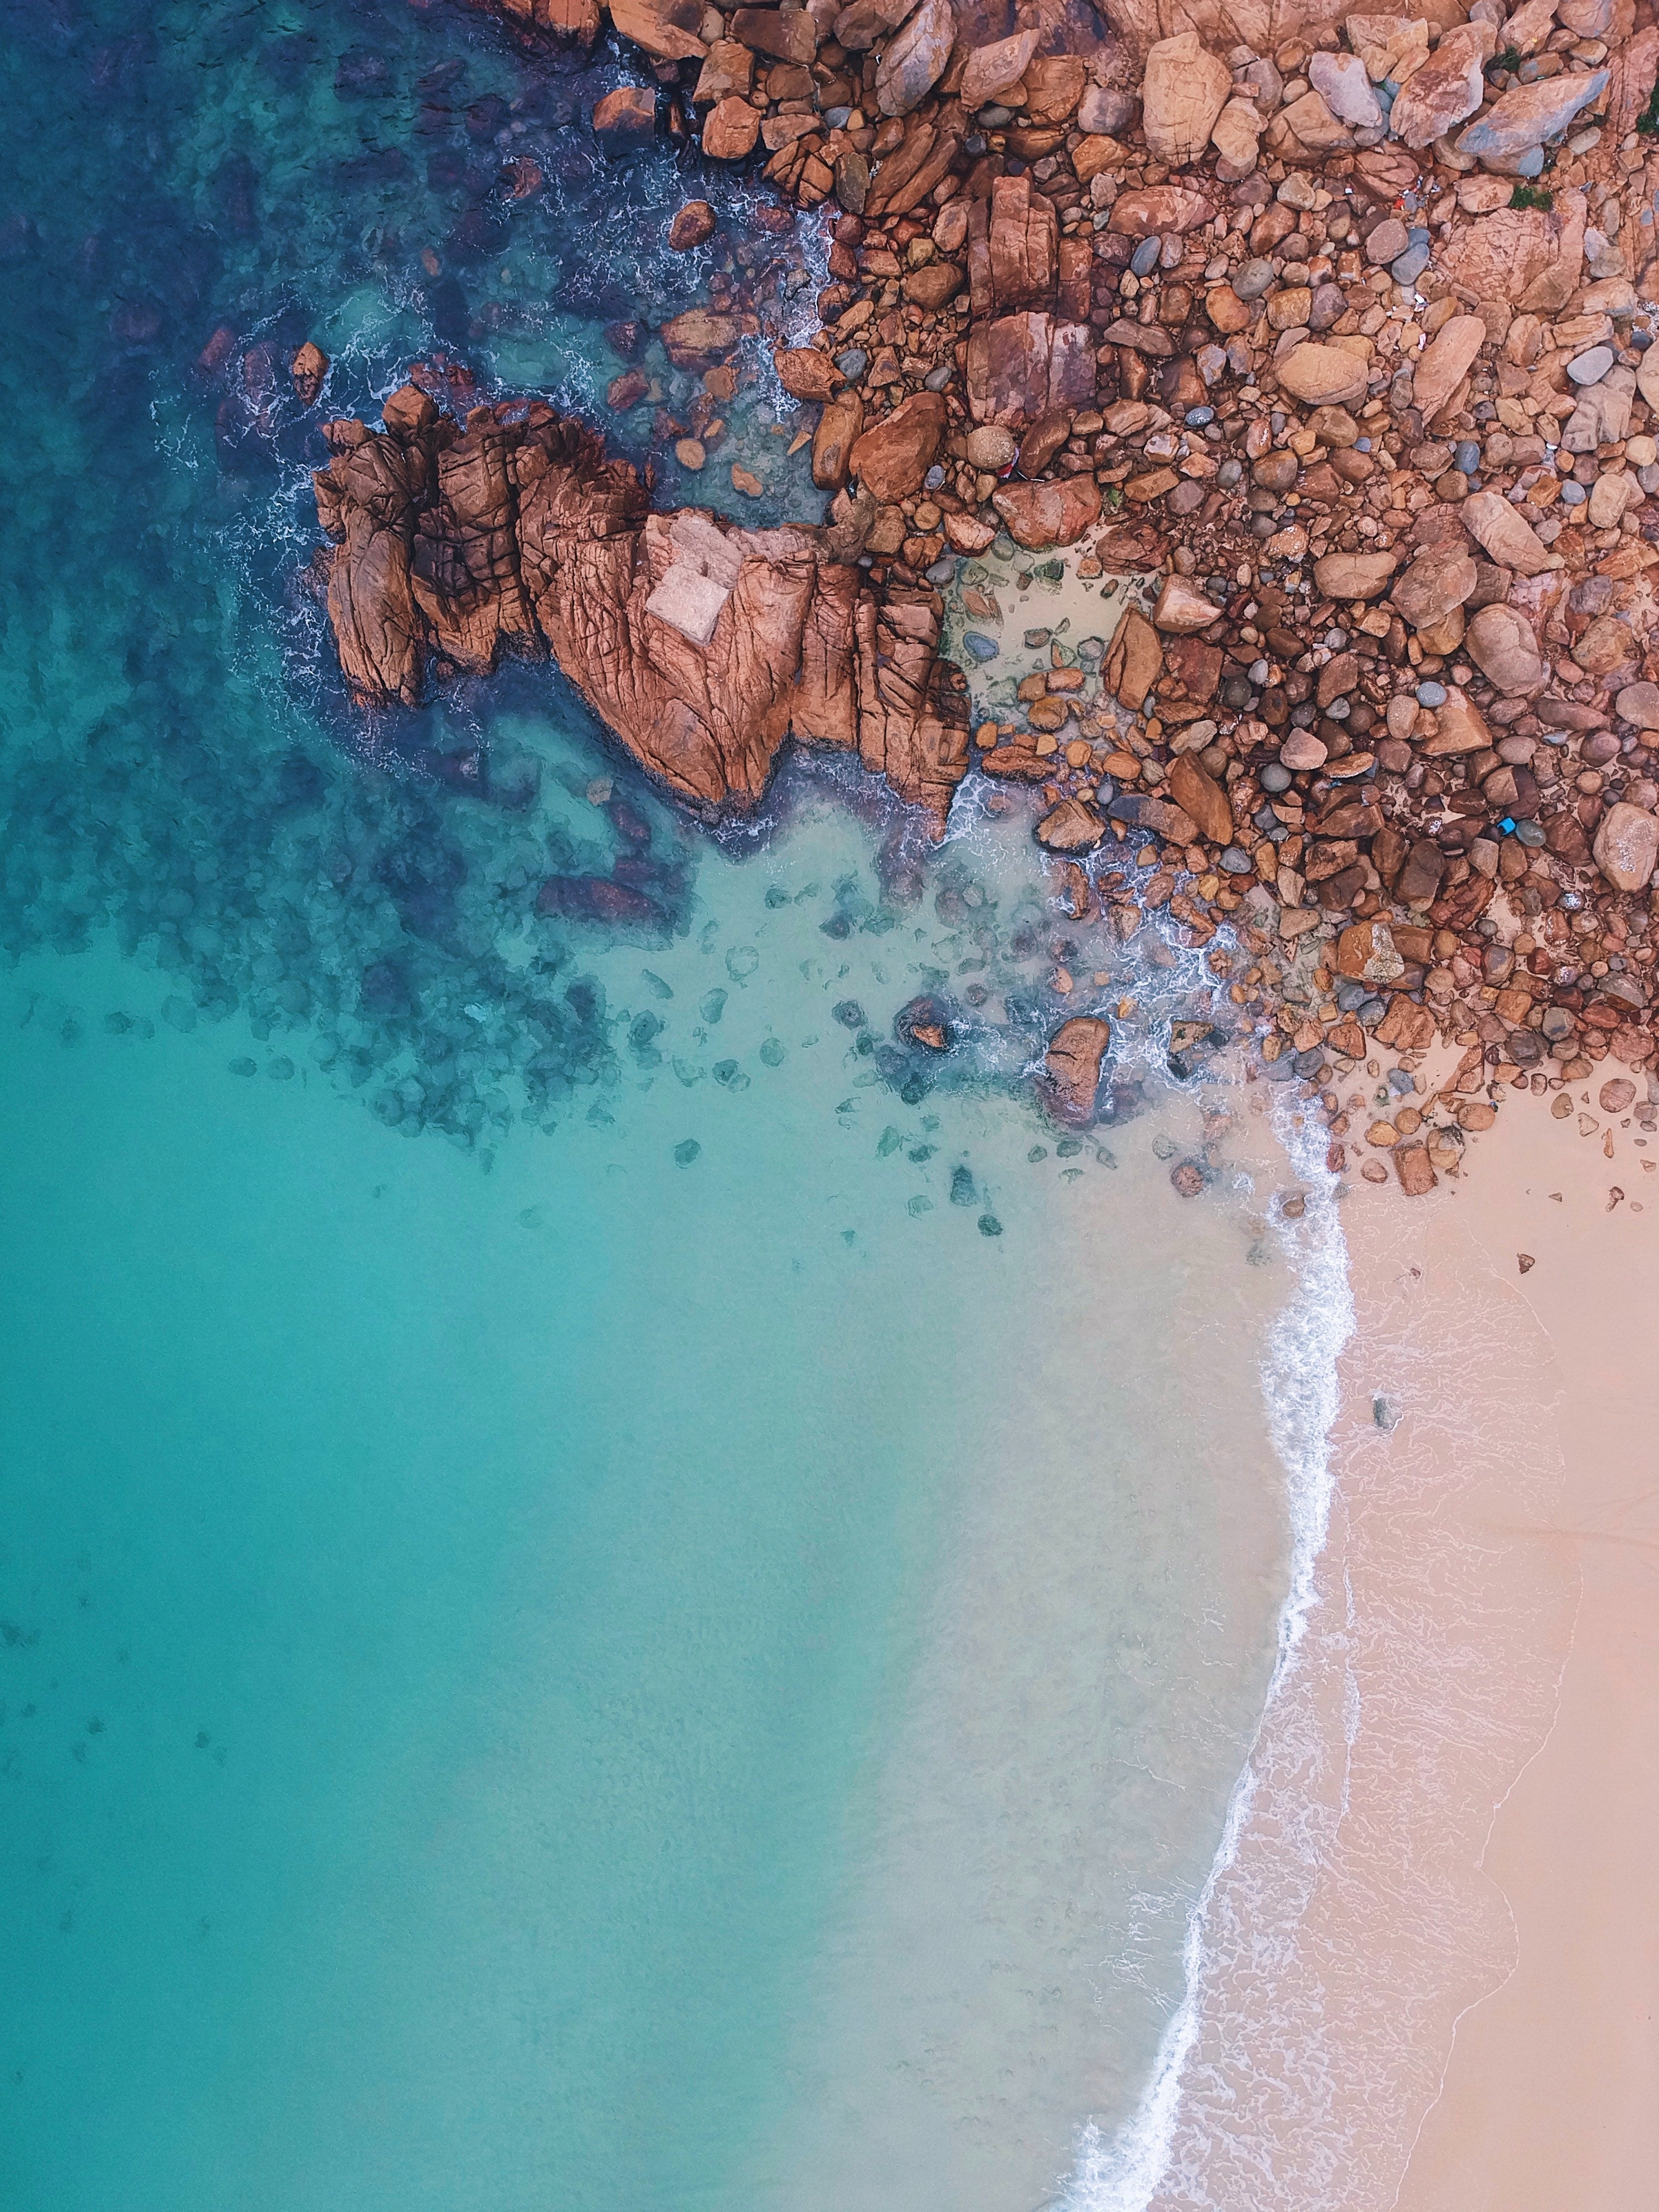 sand, stones, nature, water, view from above, ocean